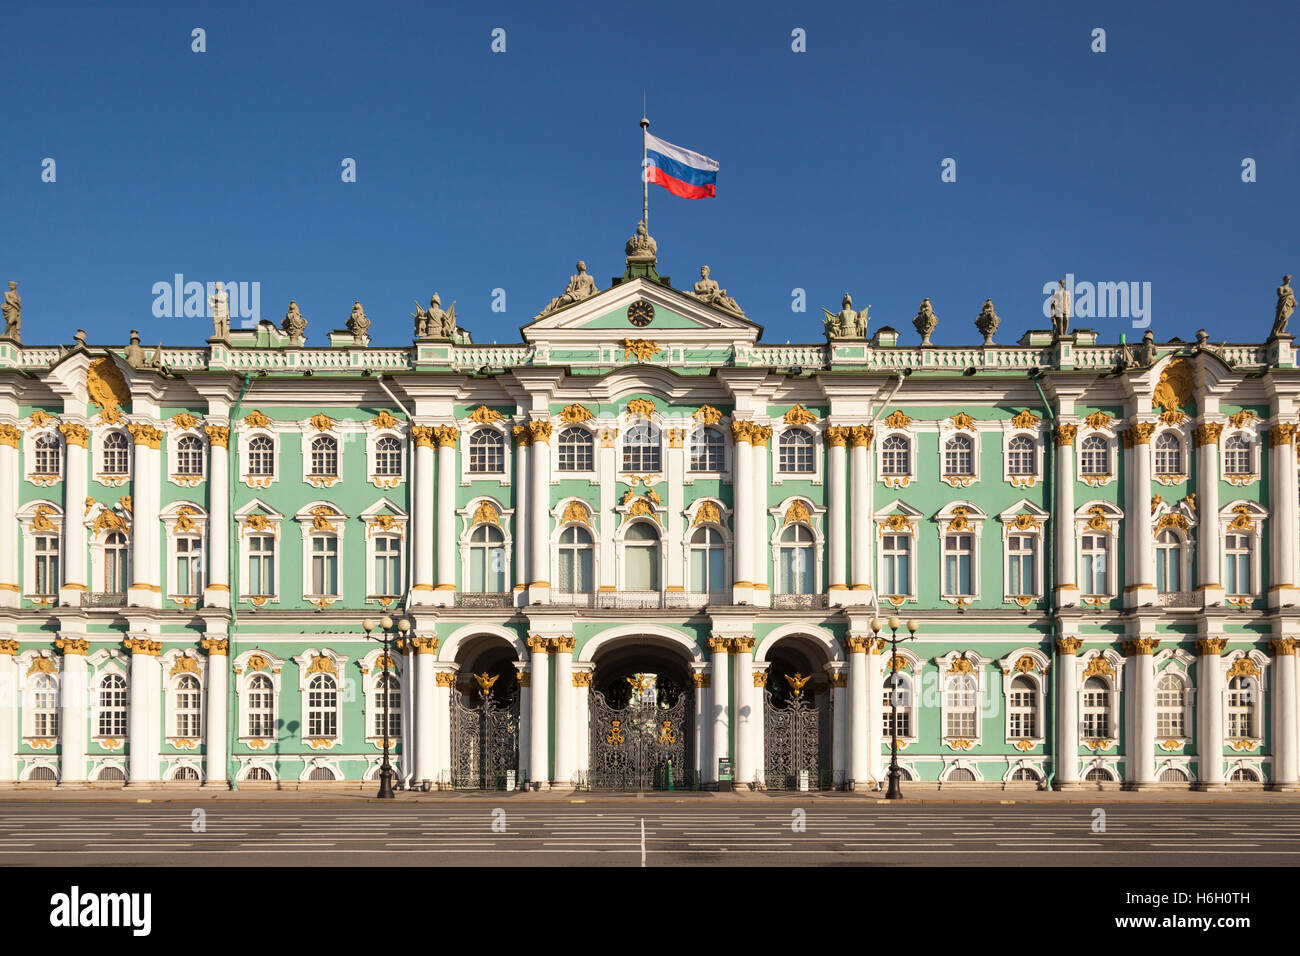 The Winter Palace, Hermitage Museum, from Palace Square, St Petersburg, Russia Stock Photo